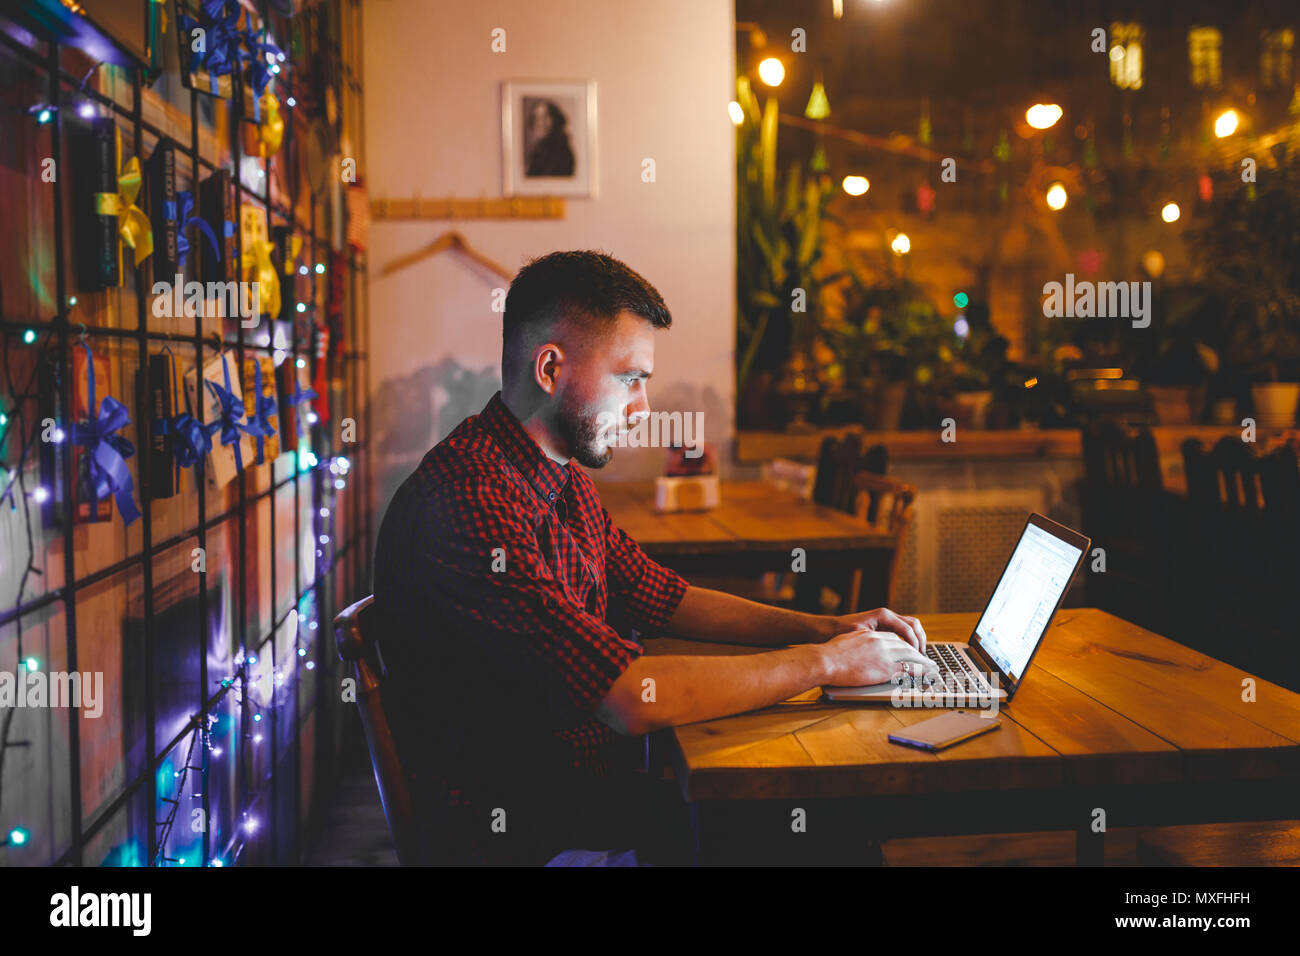 A young handsome Caucasian man with beard and toothy smile in a red checkered shirt is working behind a gray laptop sitting at a wooden table. Hands on the keyboard. In the evening at the coffee shop Stock Photo